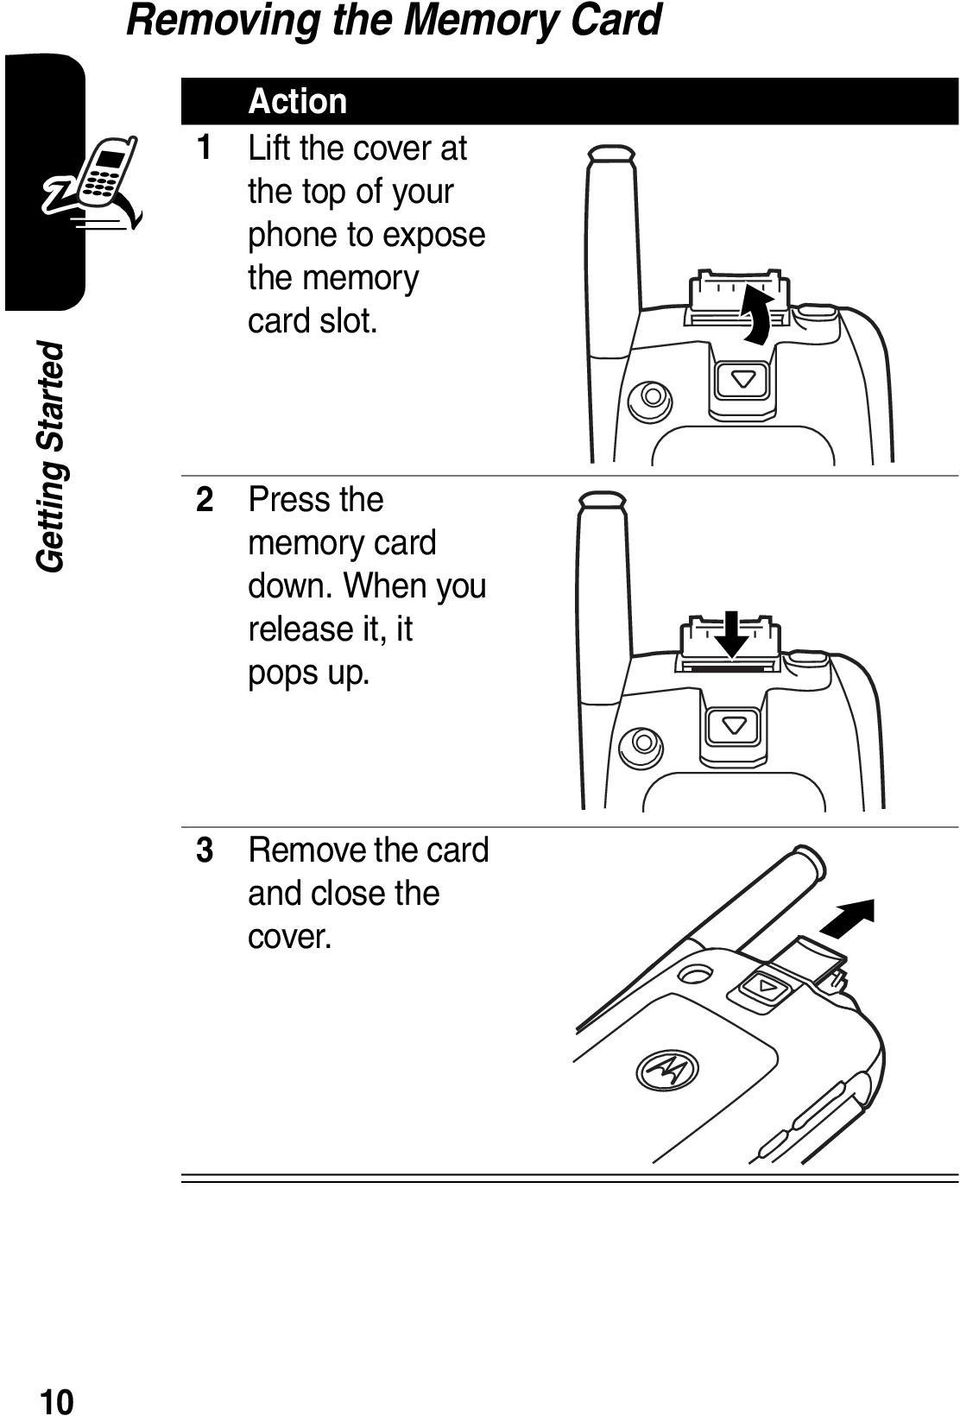 2 Press the memory card down. When you release it, it pops up.